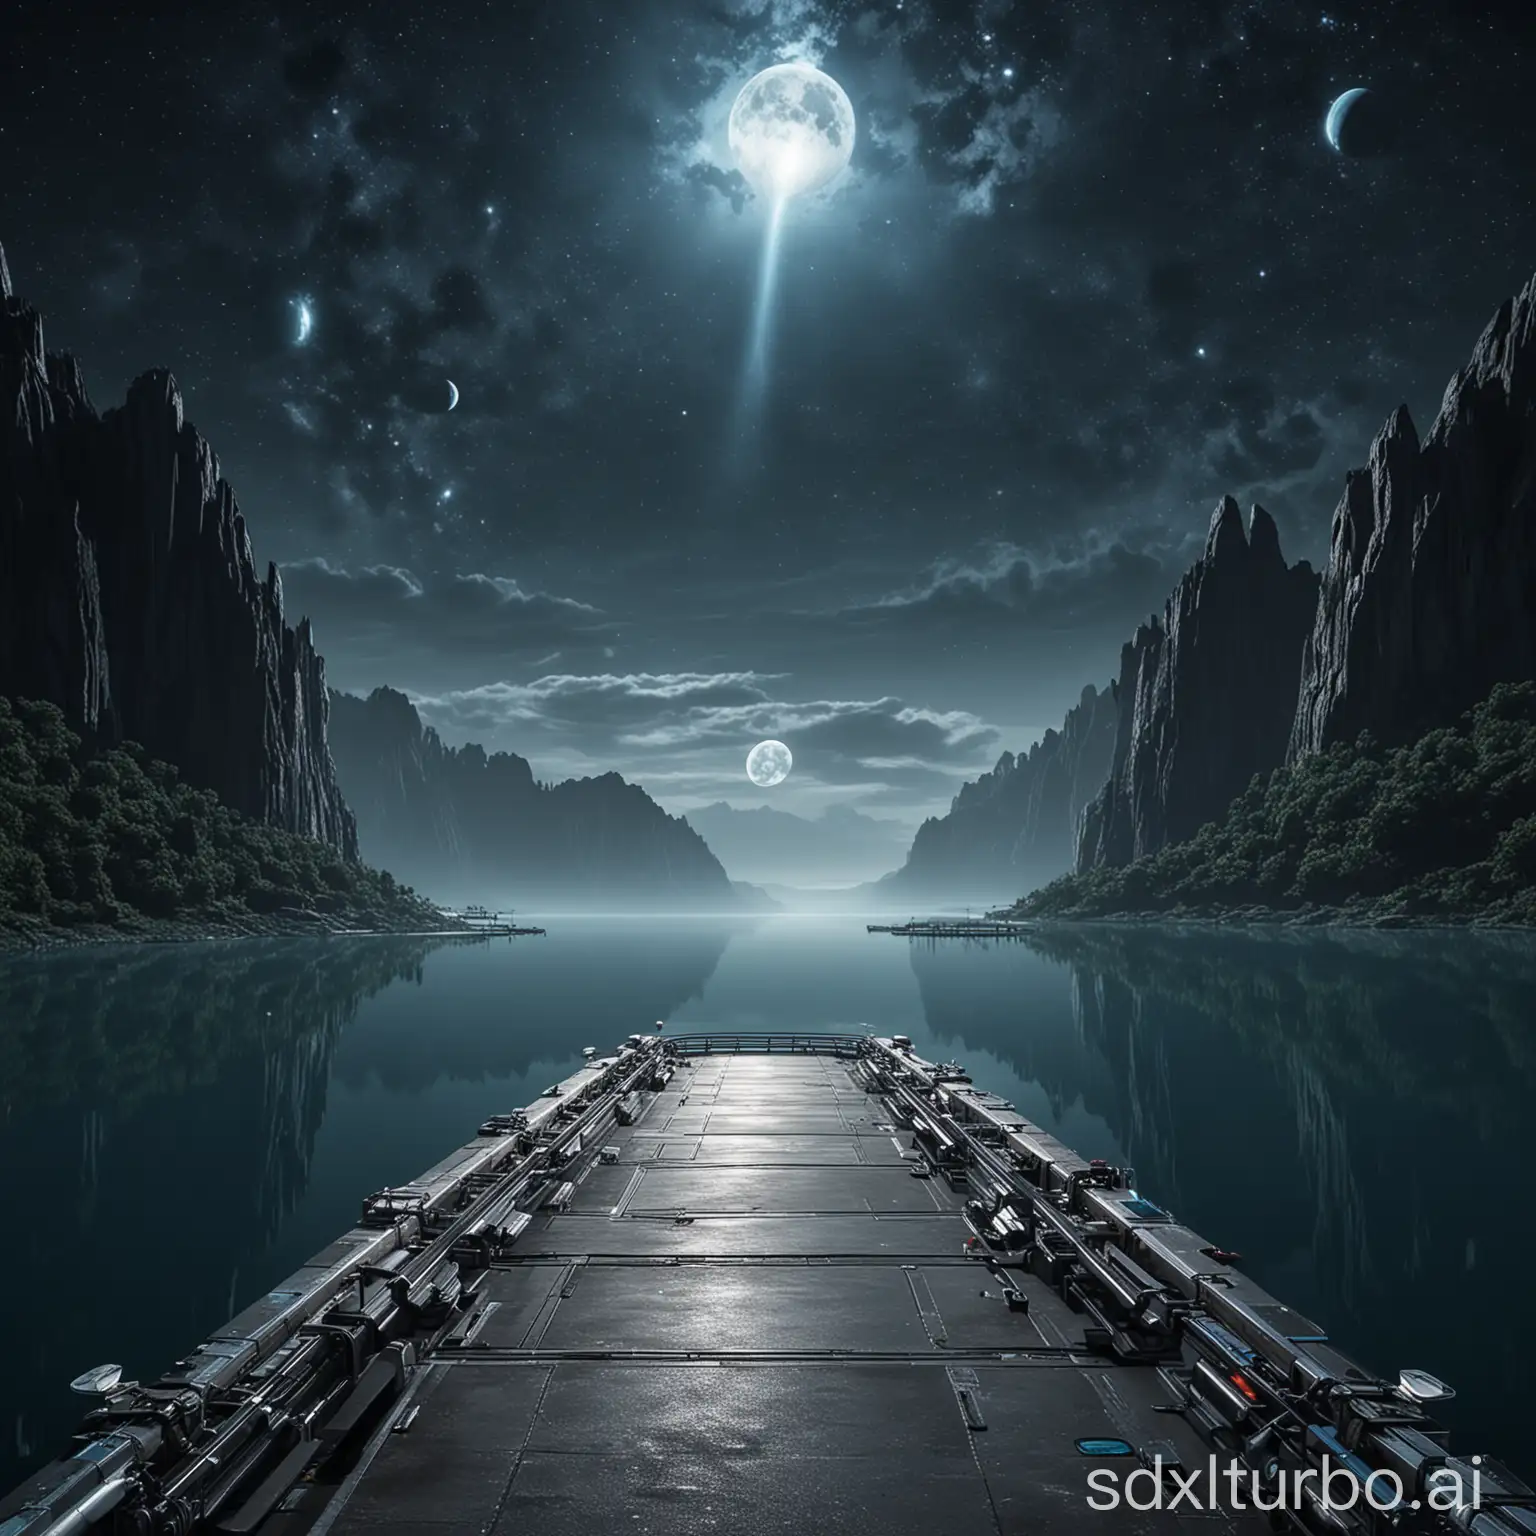 Futuristic-Night-Platform-with-Lake-and-Planet-View